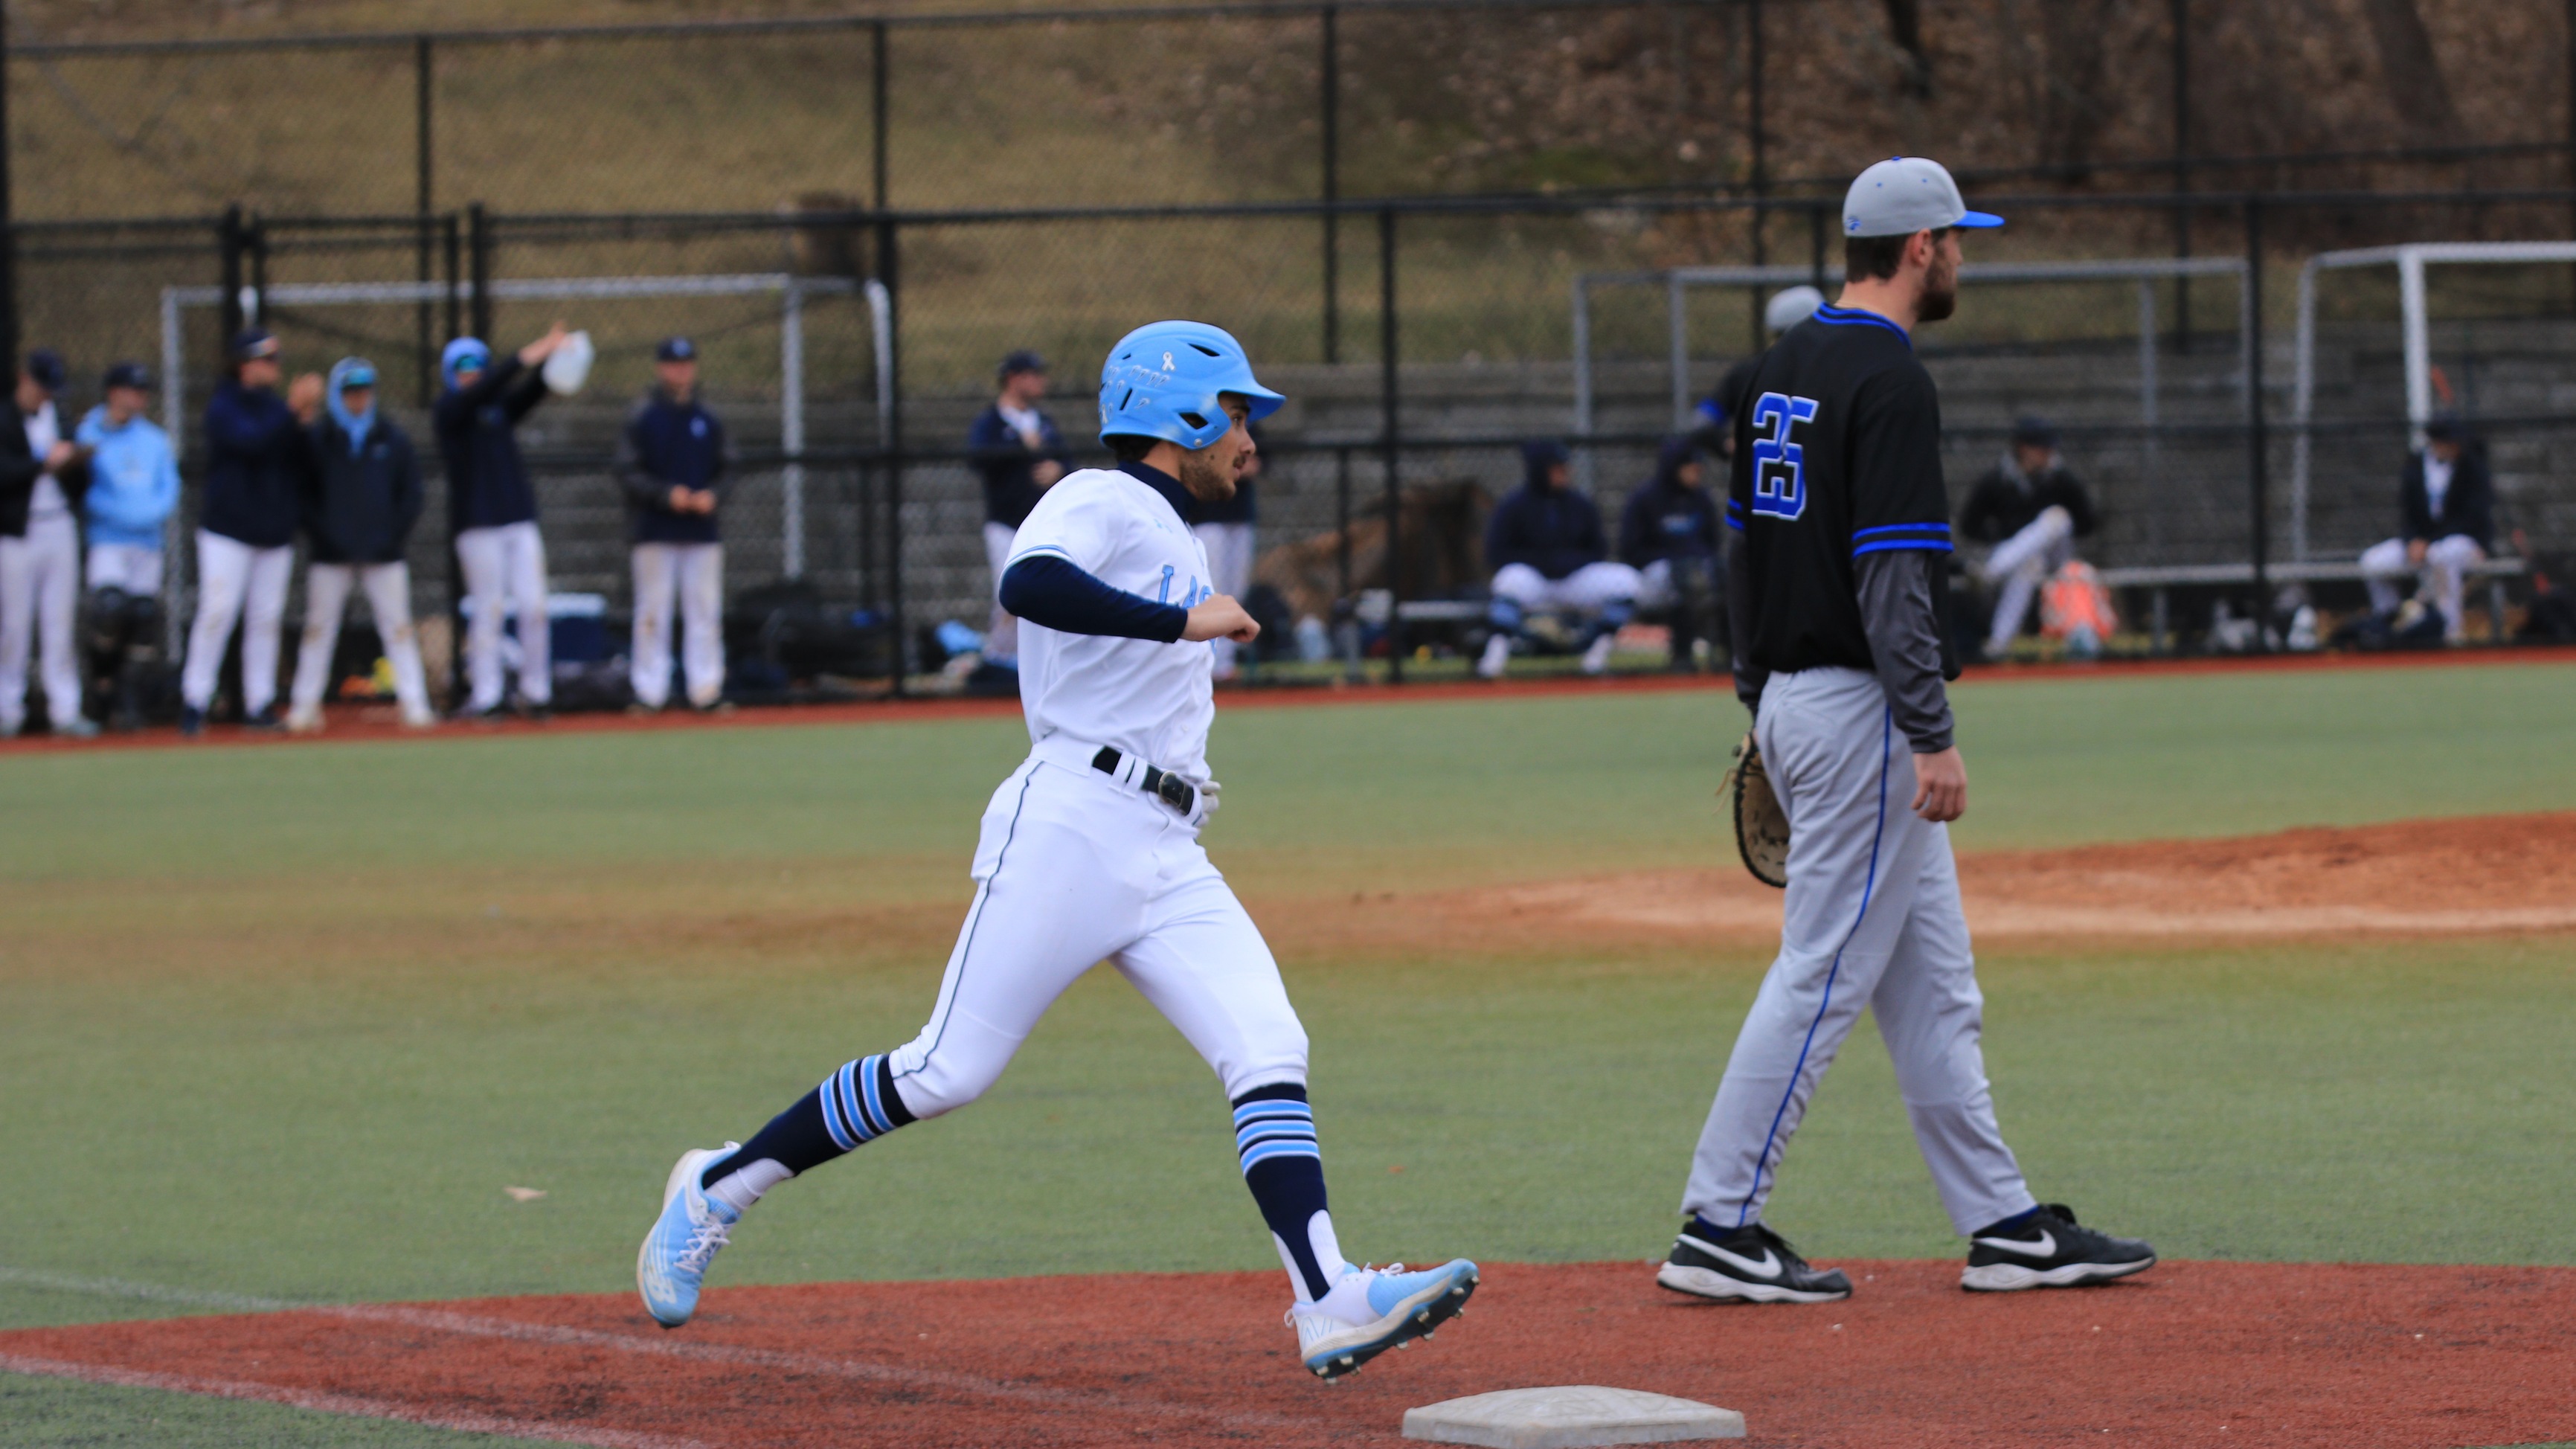 Baseball: Lasell sweeps Elms, breaks school run record in the process to stay undefeated in the GNAC